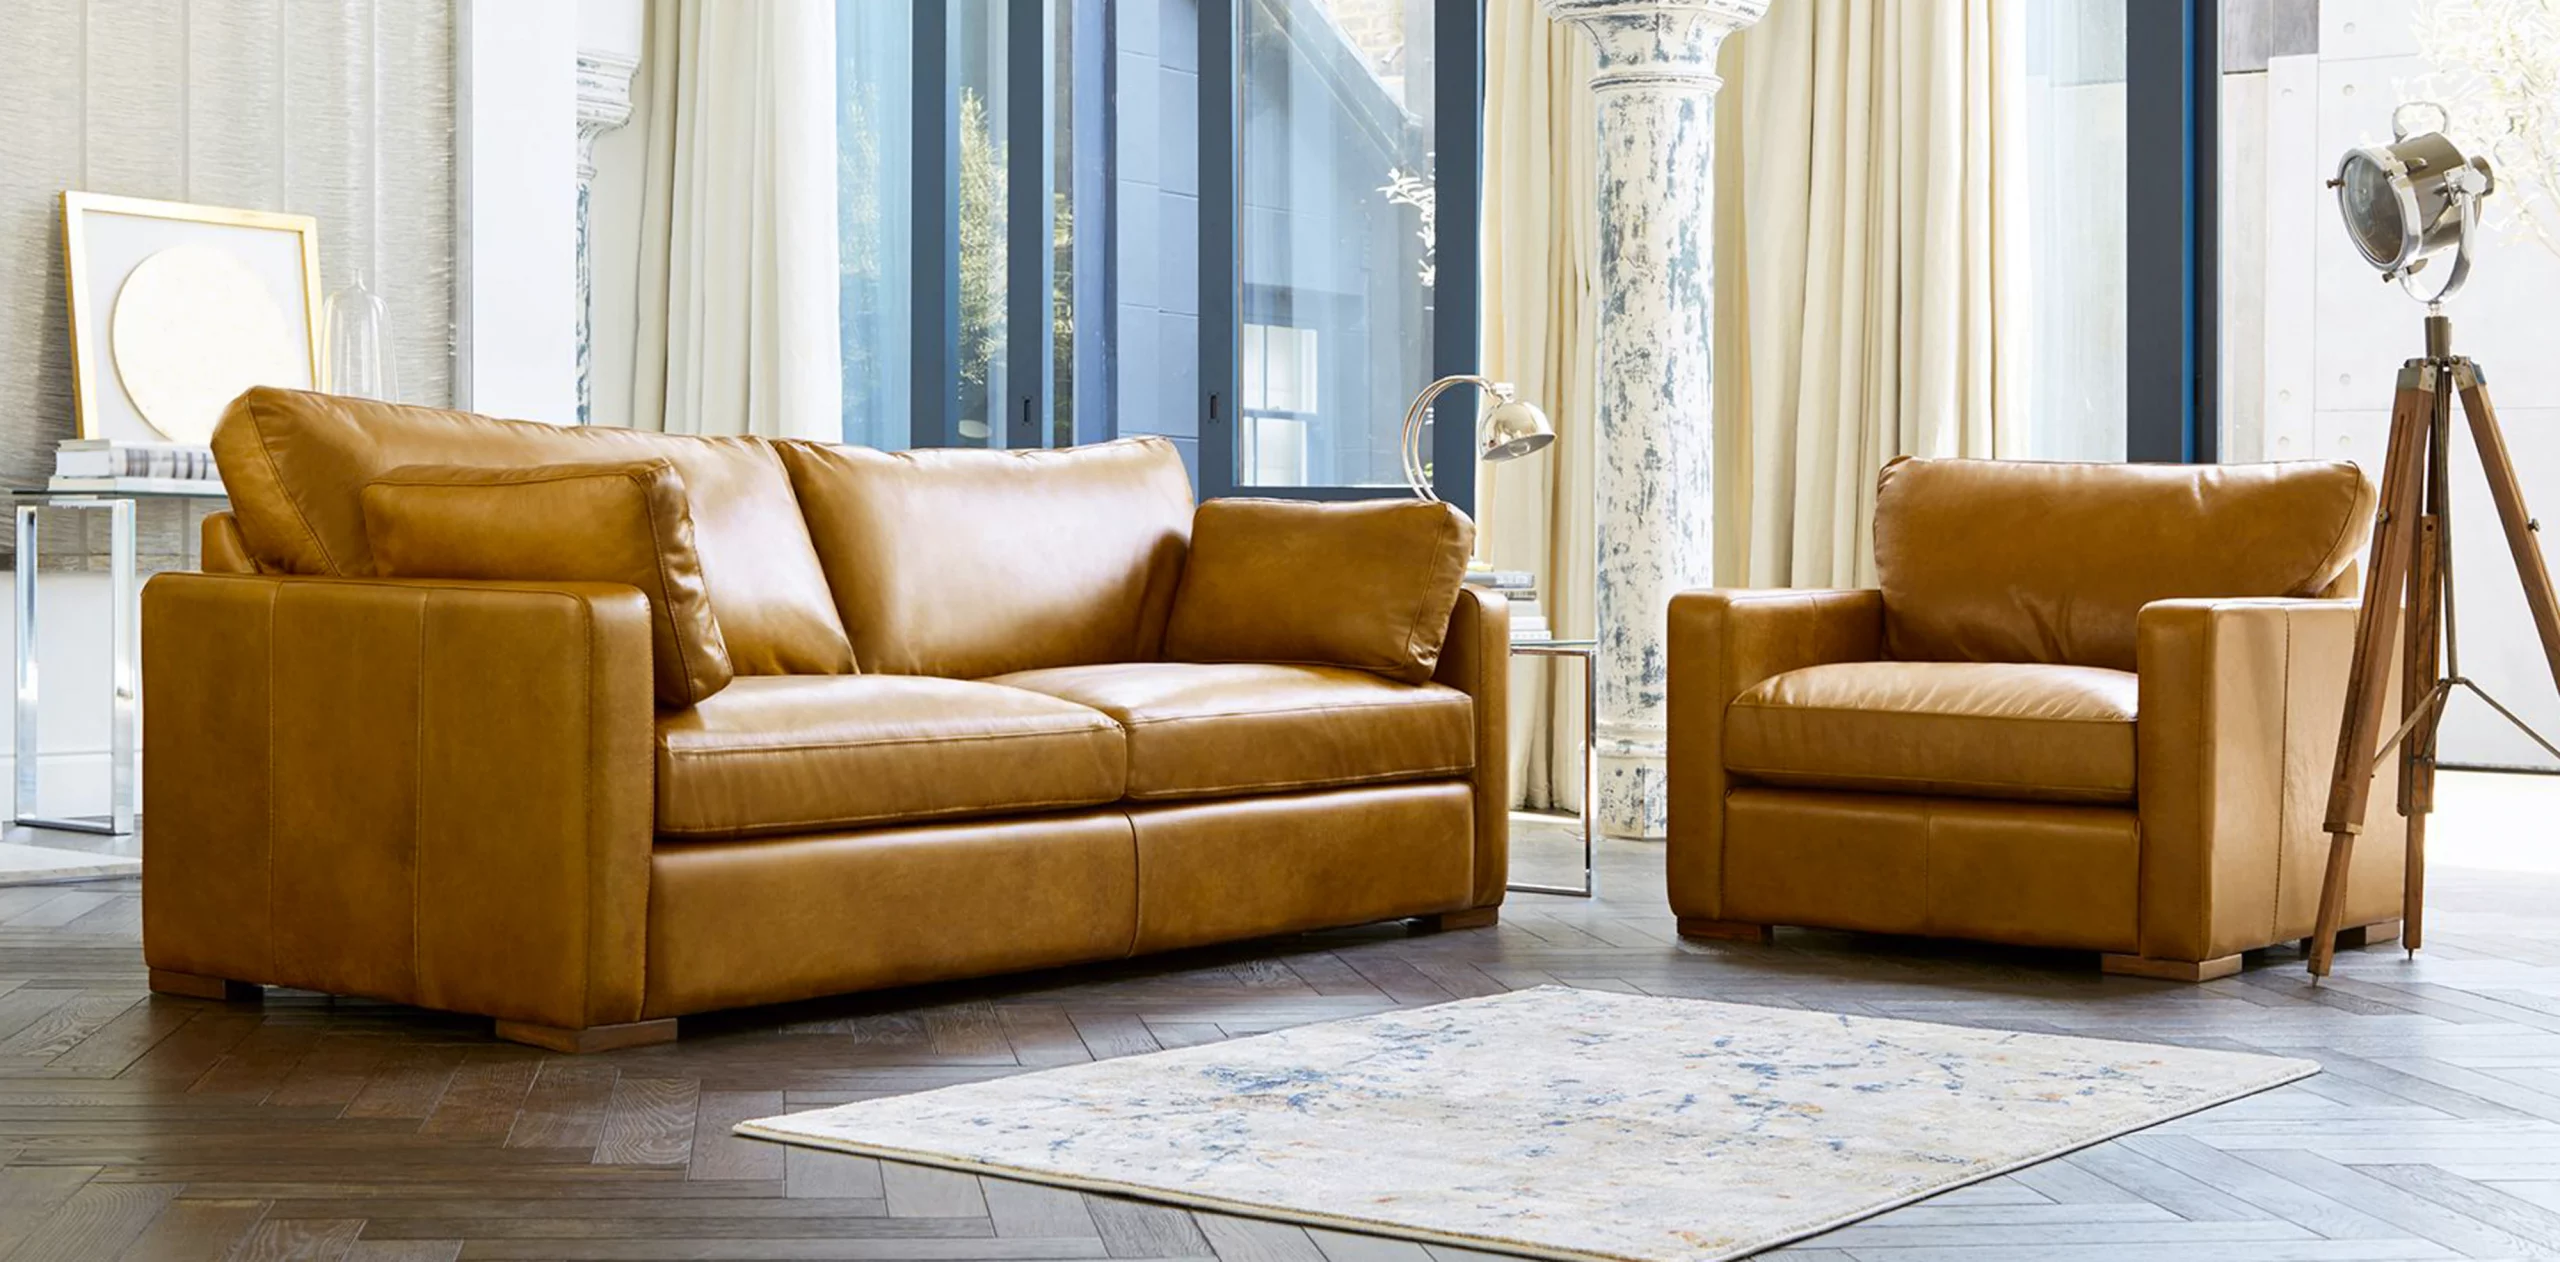 brown leather sofa and chair